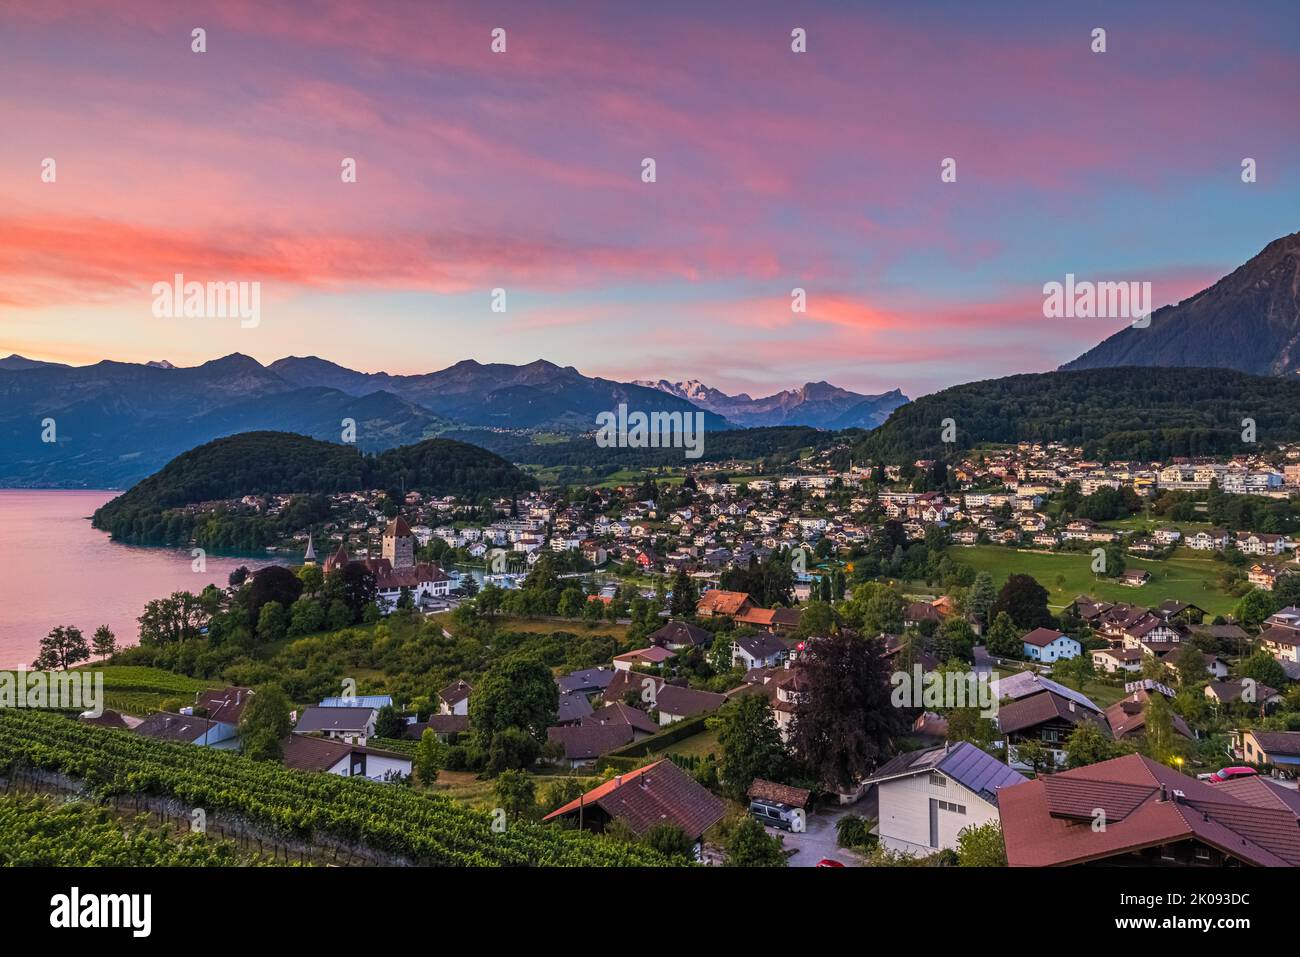 A beautiful summer sunrise in Spiez on Lake Thun, located in the Bernese Oberland. Spiez is part of the Swiss canton of Bern in central Switzerland. T Stock Photo